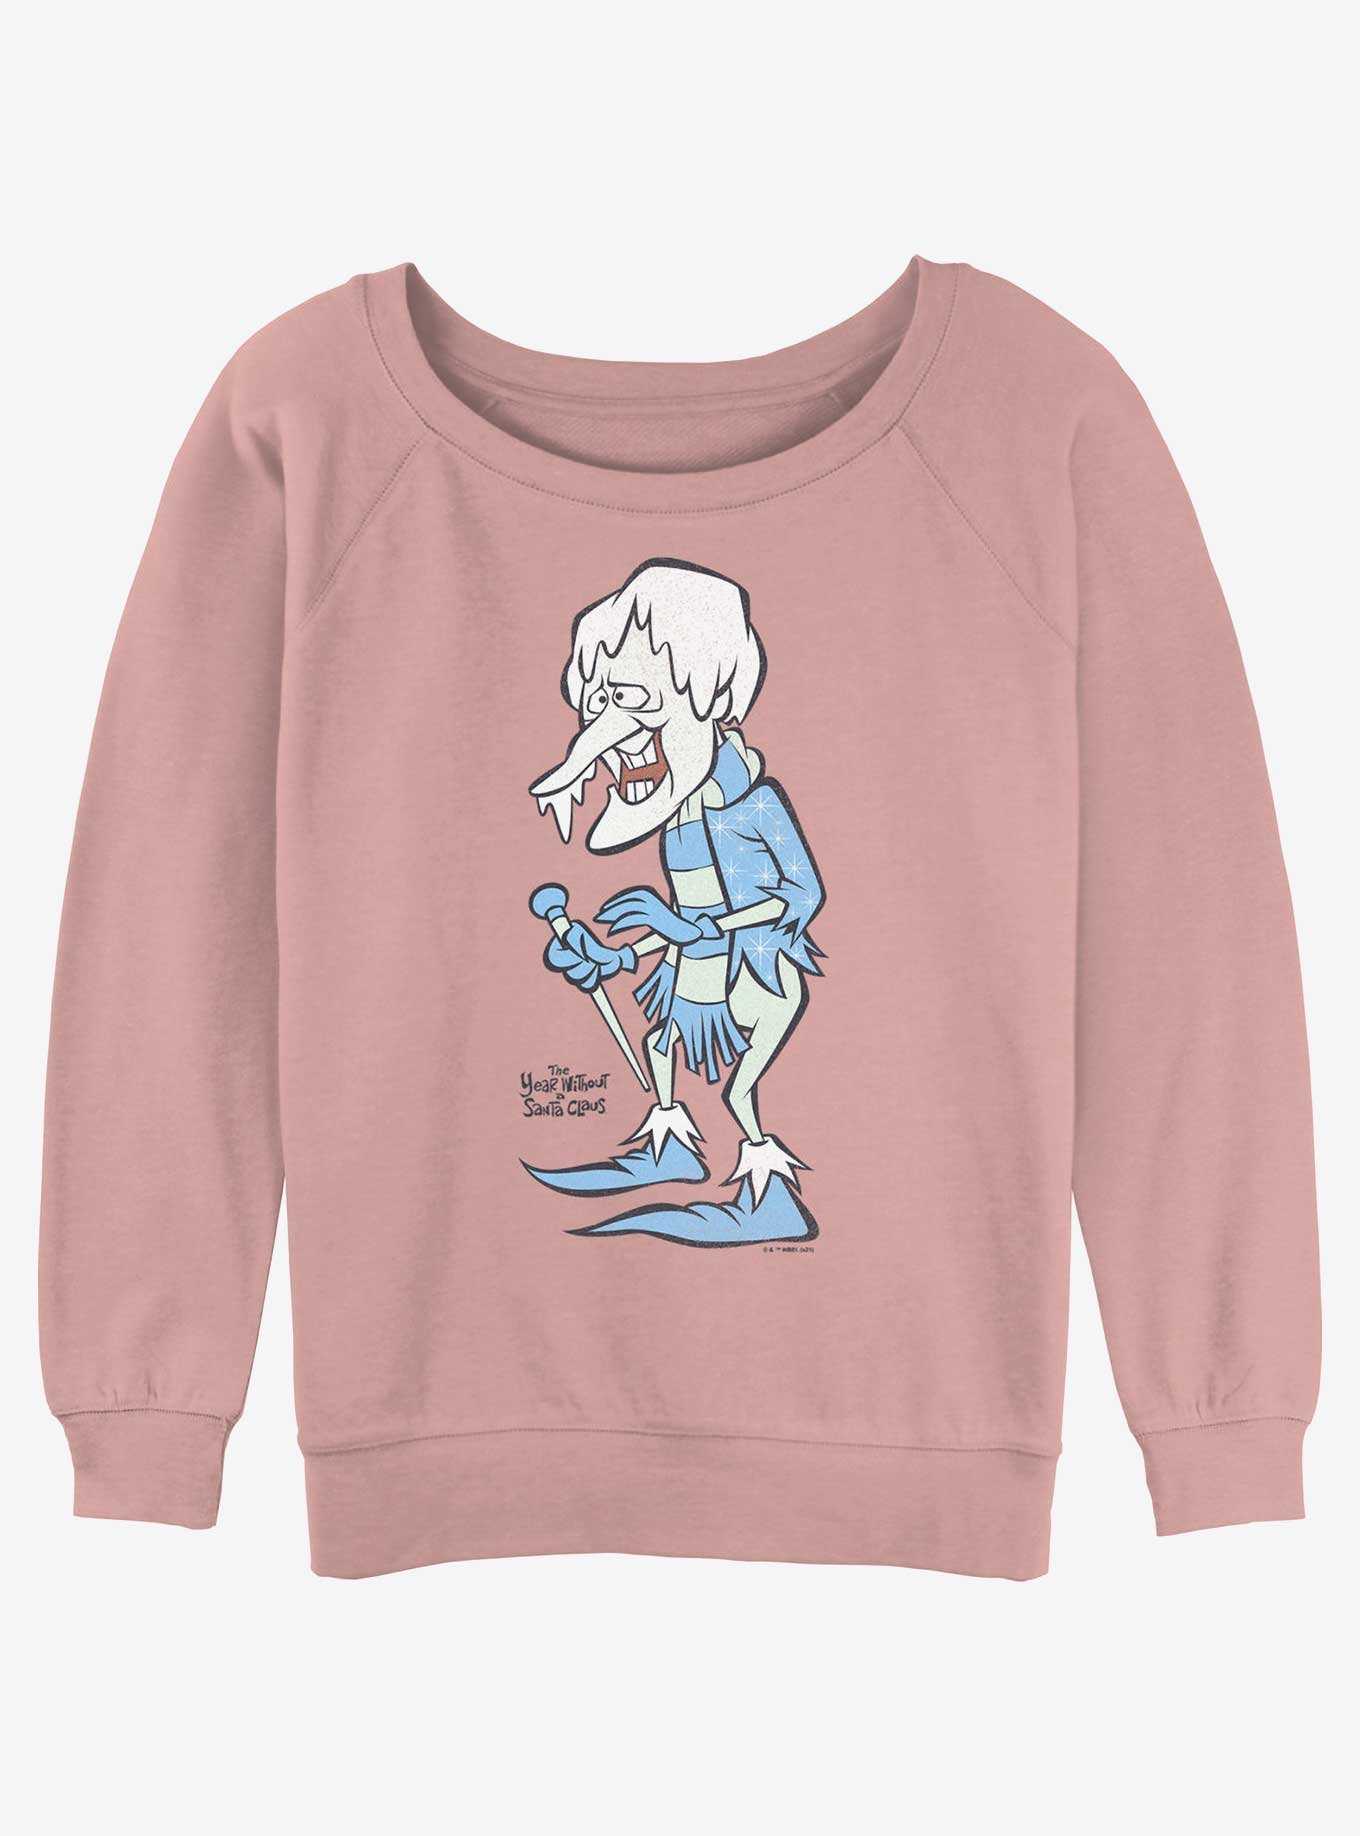 The Year Without a Santa Claus Snow Miser Girls Slouchy Sweatshirt, , hi-res